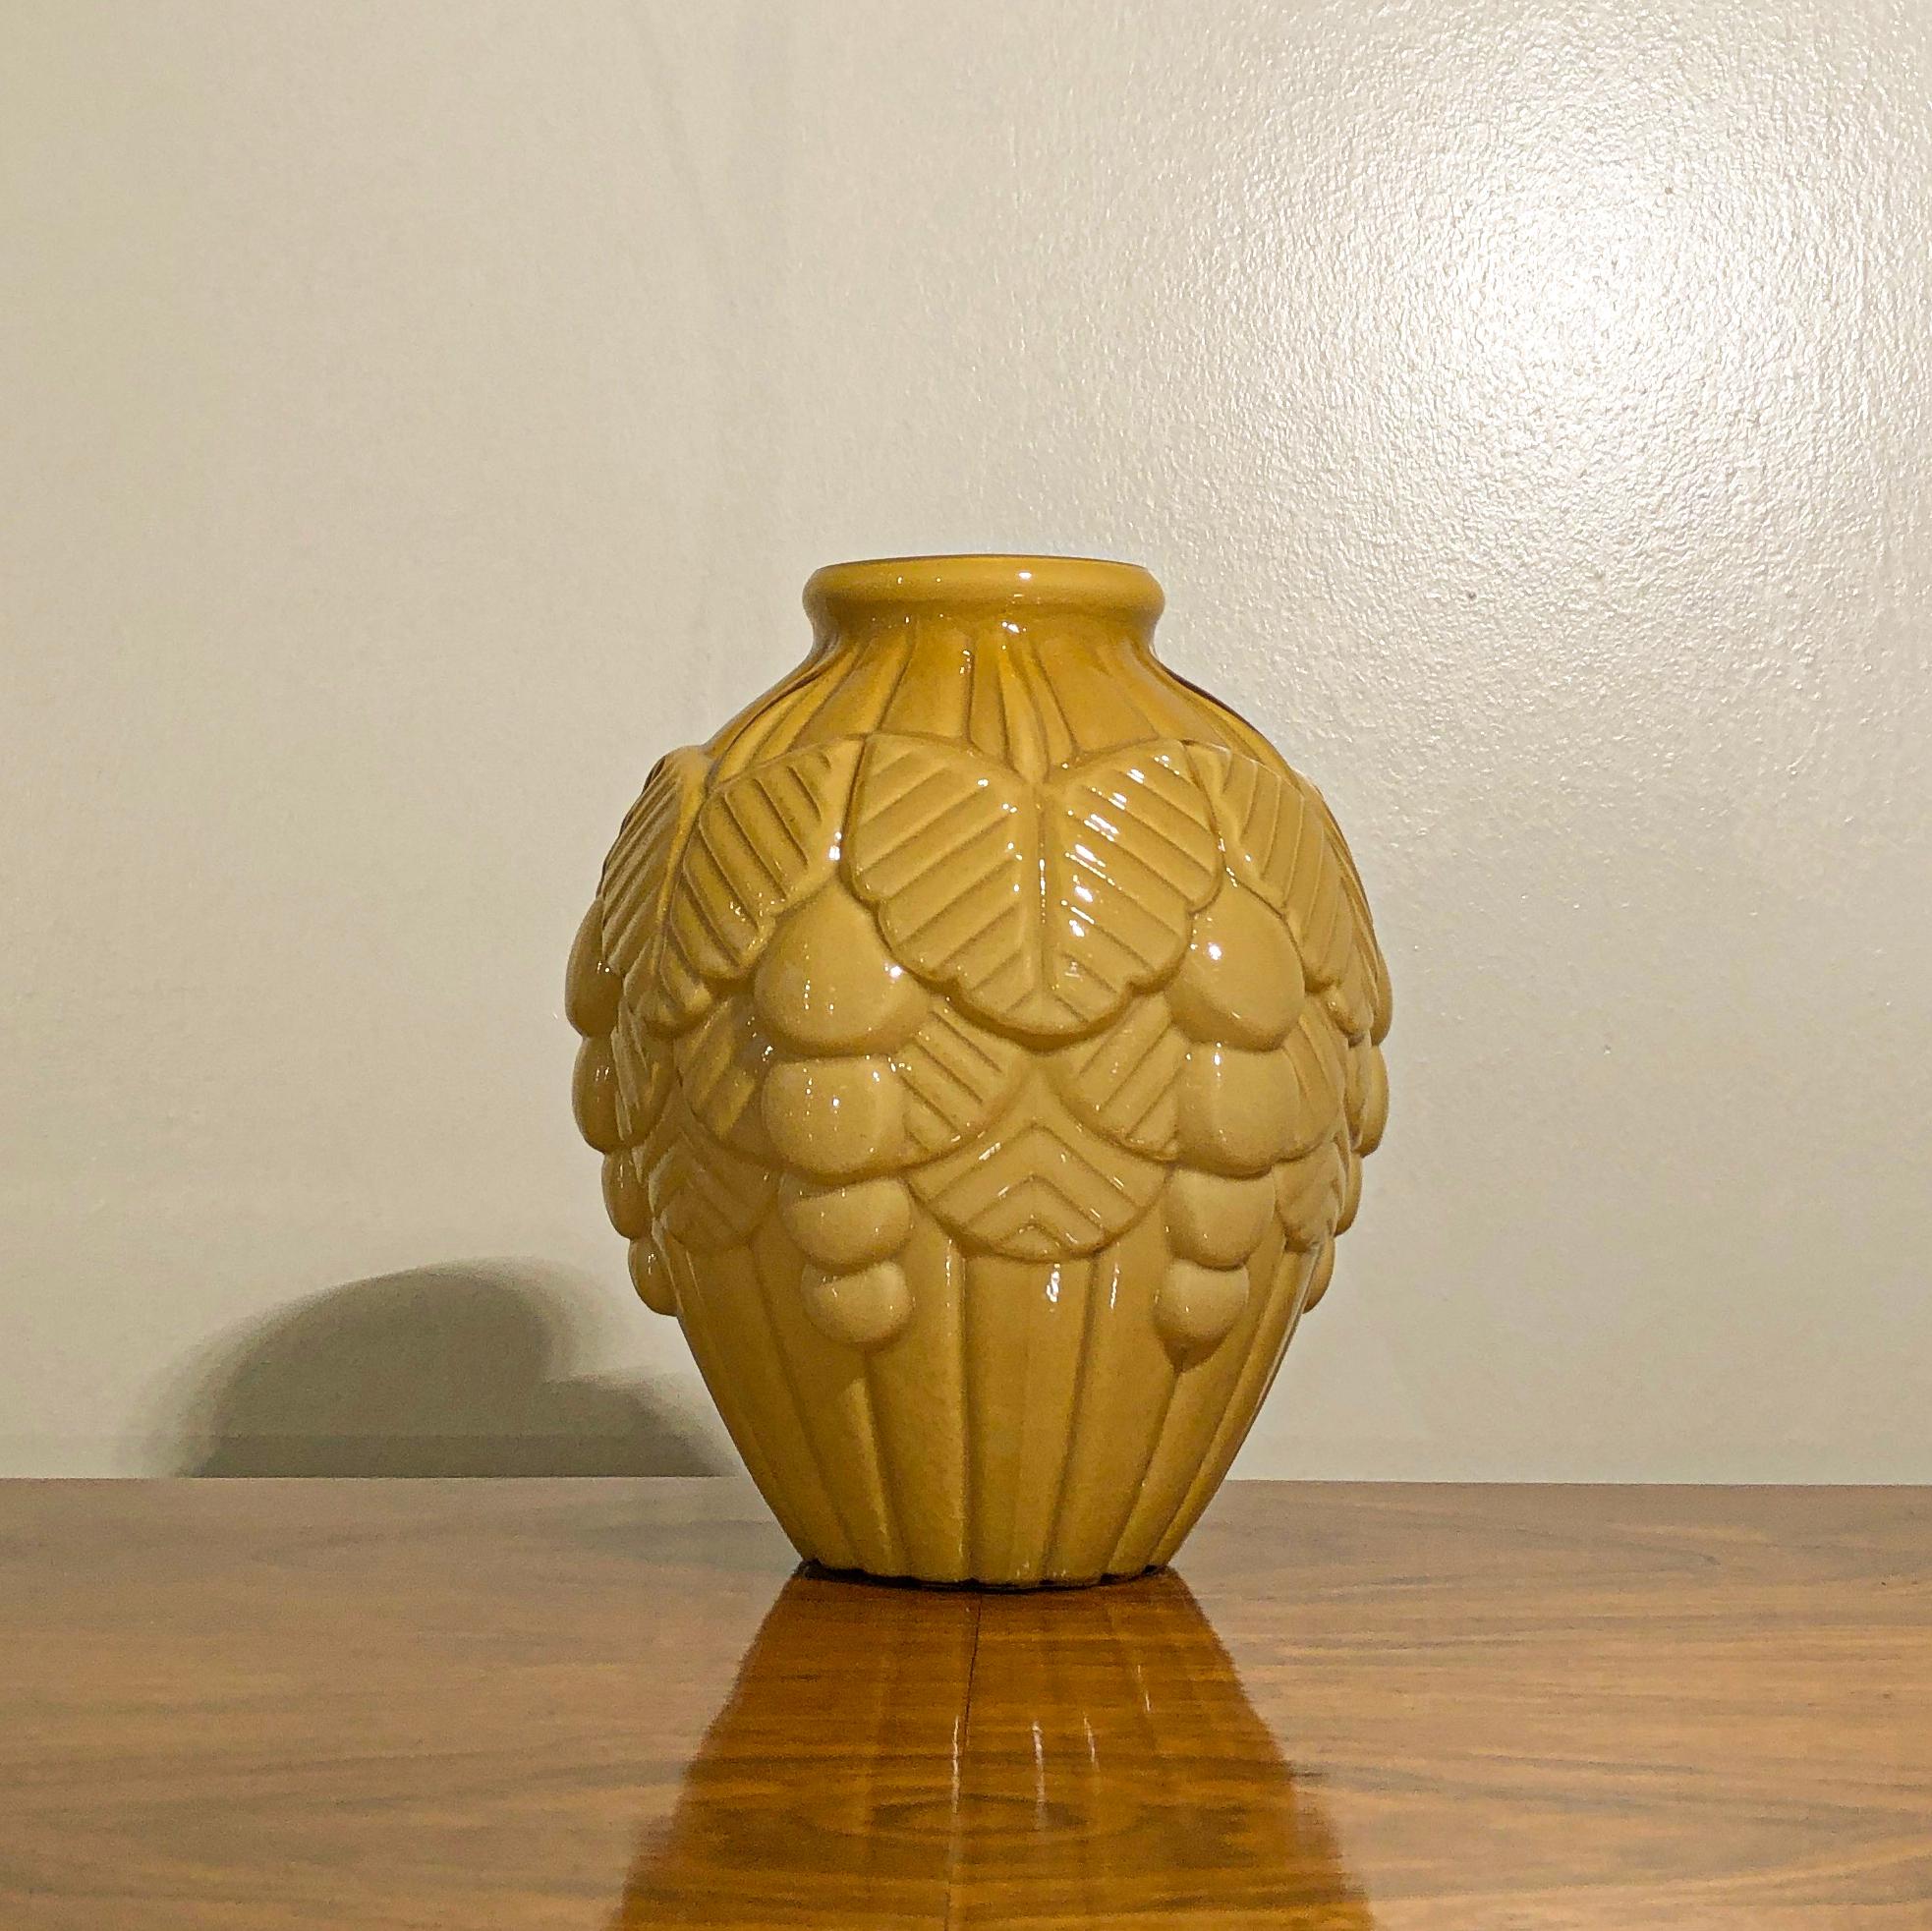 Art Deco geometrical fruit grapes motif Belgian yellow glass vase, 1930s. Perfect as charming Christmas gift, as a centerpiece or table decoration during a cocktail party, 

Size: Height 24 cm, diameter 20 cm.

A video is available upon